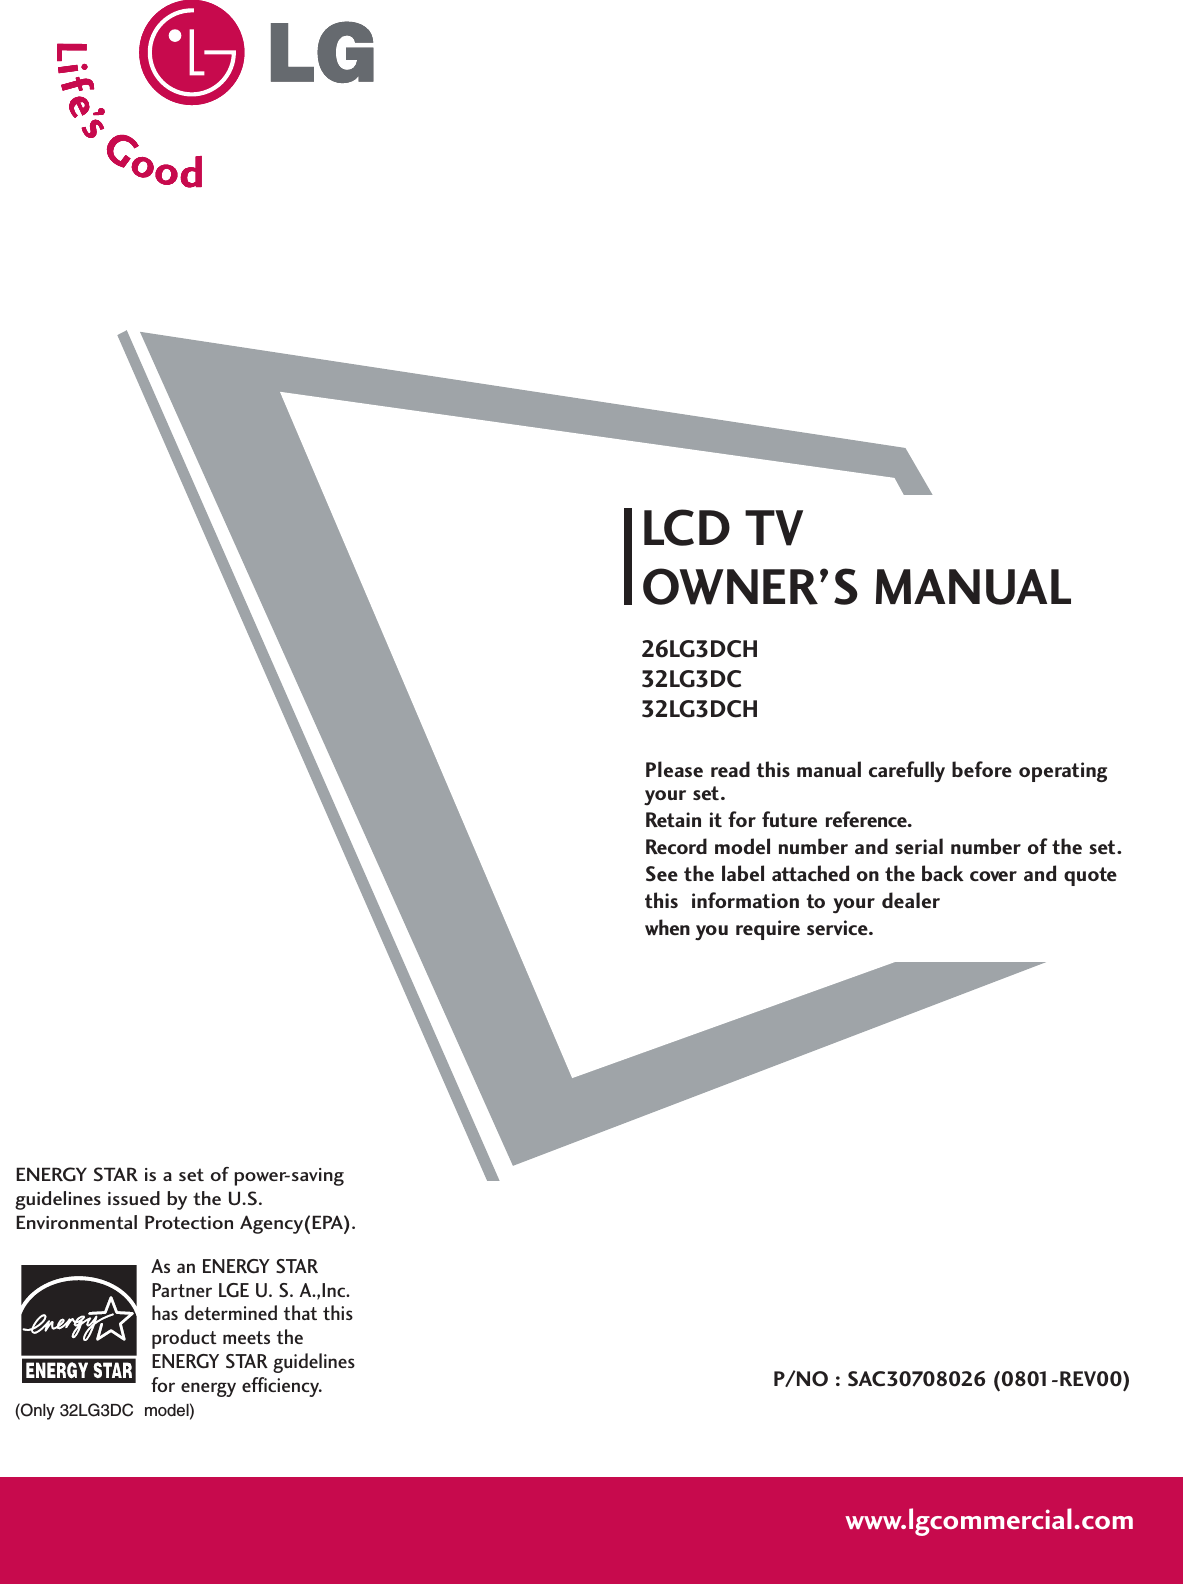 Please read this manual carefully before operatingyour set. Retain it for future reference.Record model number and serial number of the set. See the label attached on the back cover and quote this  information to your dealer when you require service.LCD TVOWNER’S MANUAL26LG3DCH32LG3DC32LG3DCHP/NO : SAC30708026 (0801-REV00)www.lgcommercial.comAs an ENERGY STARPartner LGE U. S. A.,Inc.has determined that thisproduct meets theENERGY STAR guidelinesfor energy efficiency.ENERGY STAR is a set of power-savingguidelines issued by the U.S.Environmental Protection Agency(EPA).(Only 32LG3DC  model)